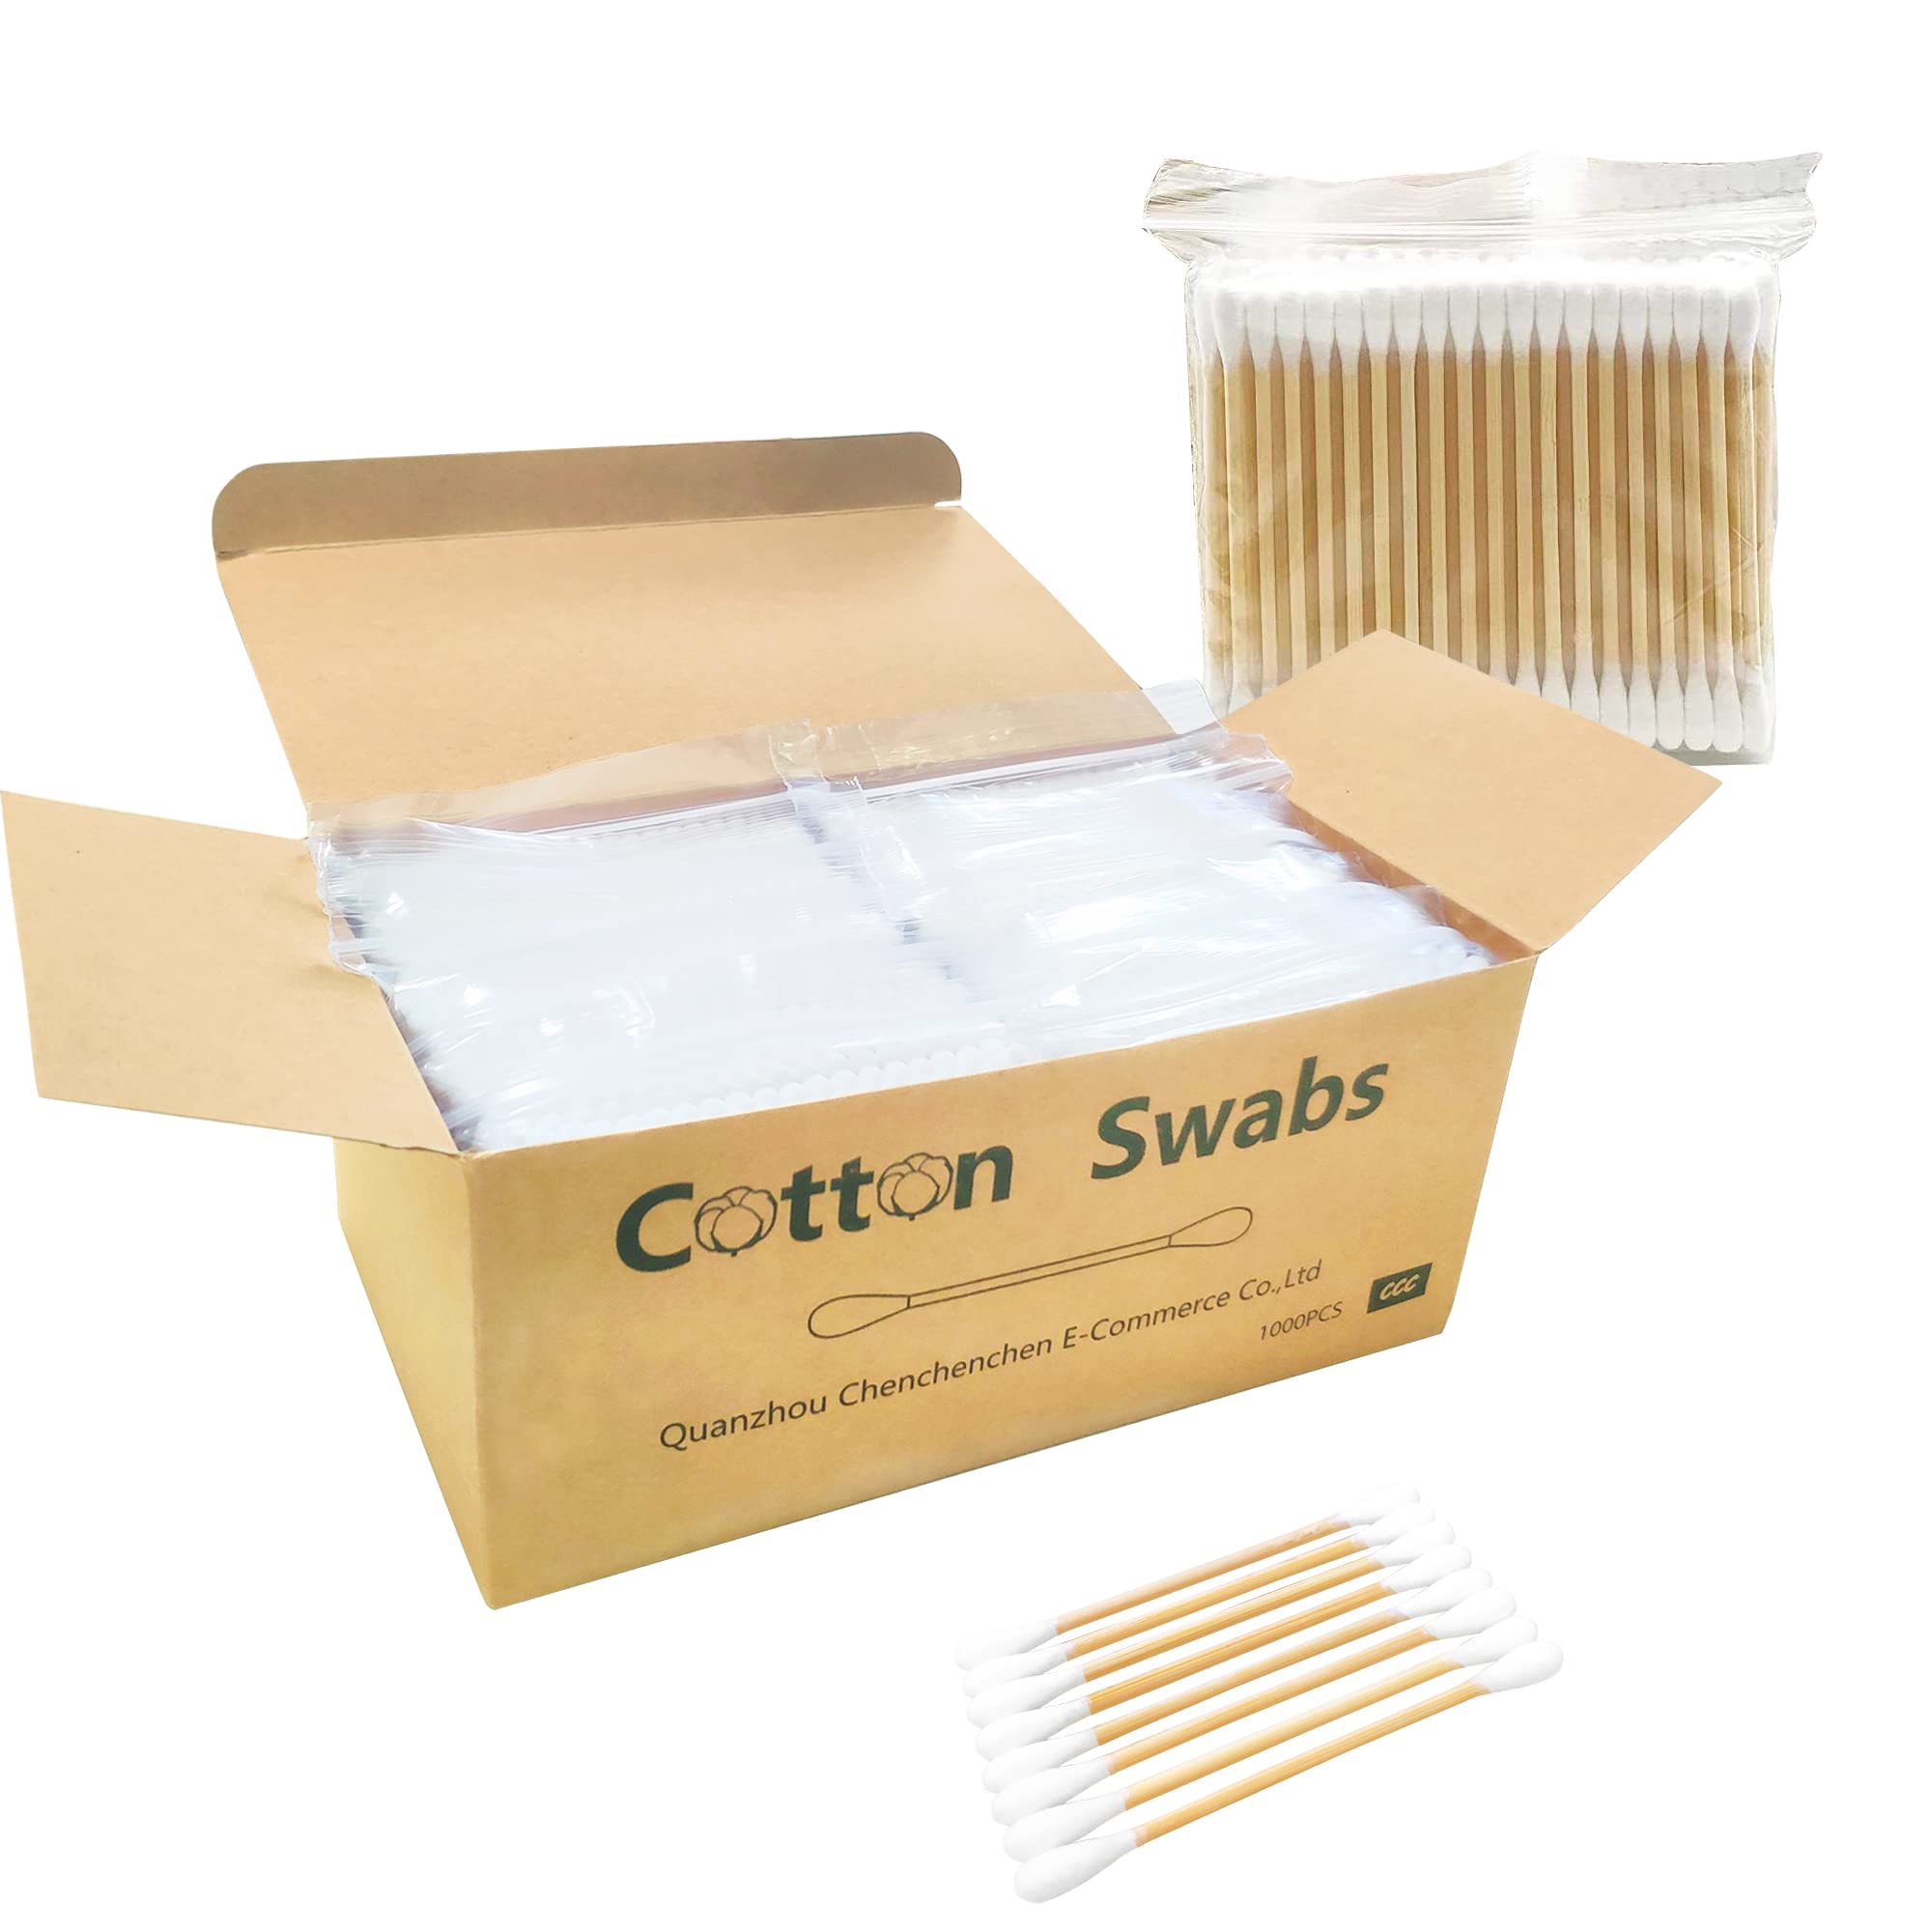 Cotton Swabs with Wooden Sticks/Biodegradable Cotton Buds 1000pcs